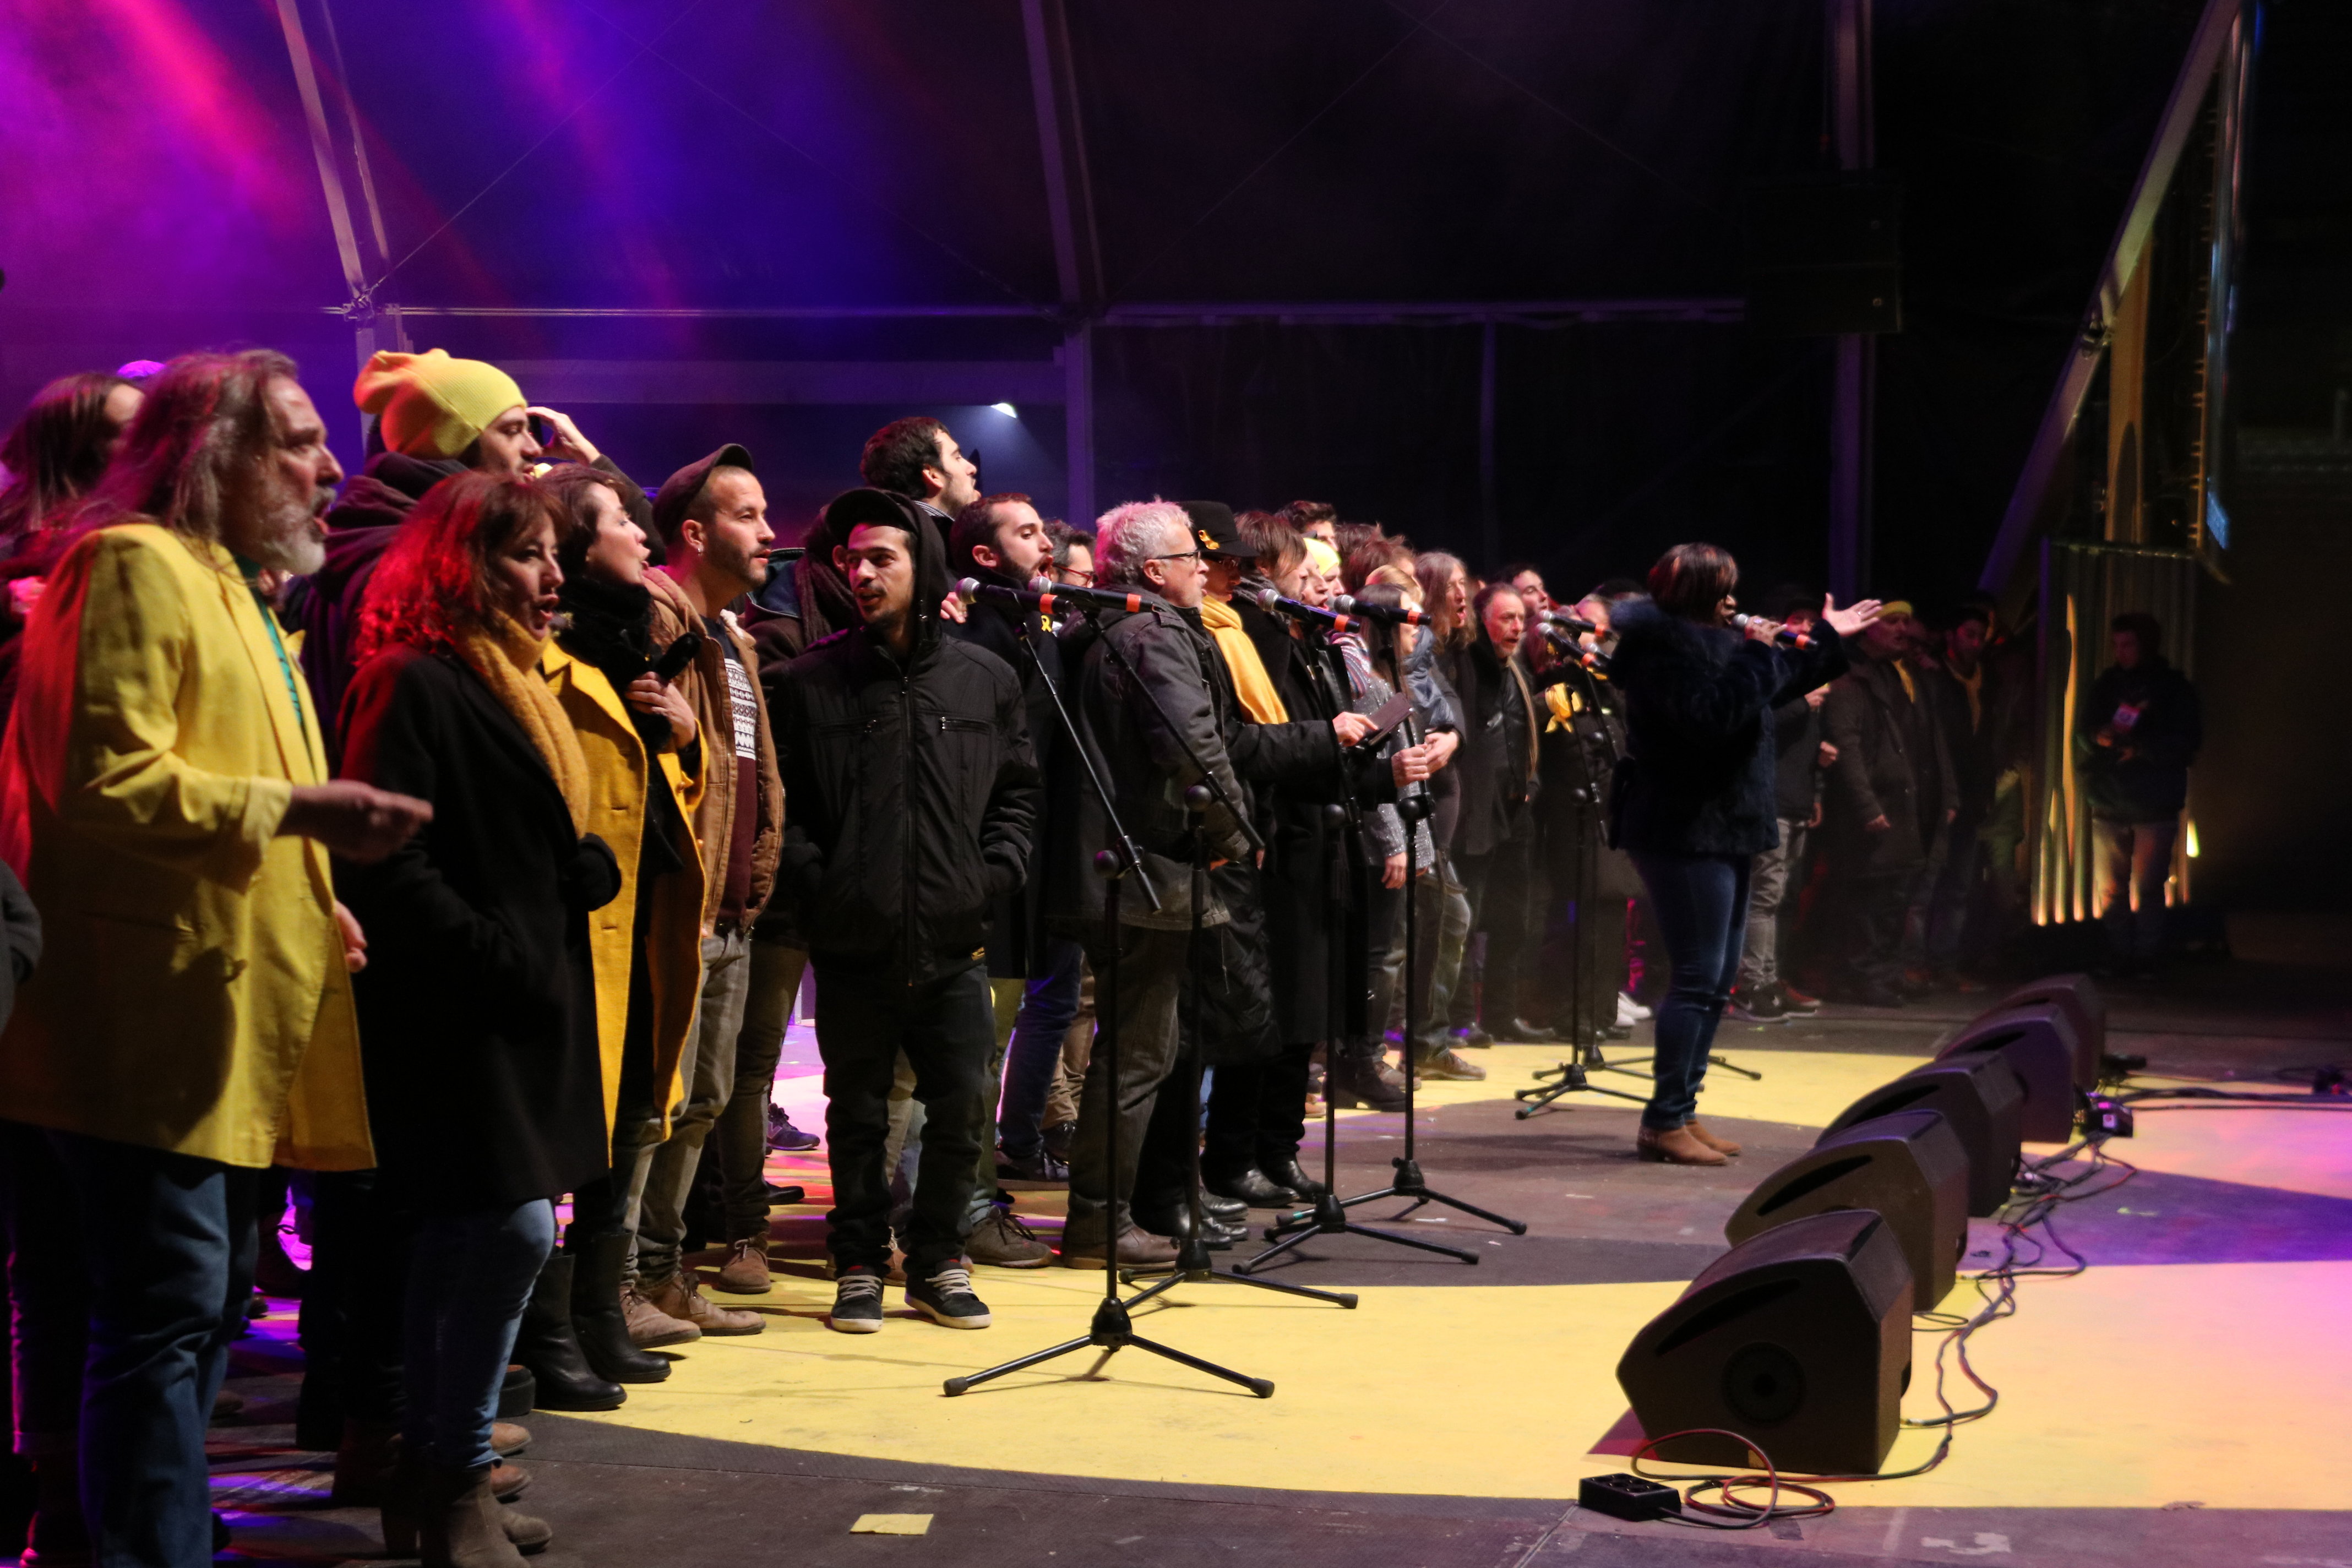 Performers on stage for the ‘Concert for the Freedom of Political Prisoners’ on December 1 2017 (by Júlia Pérez)